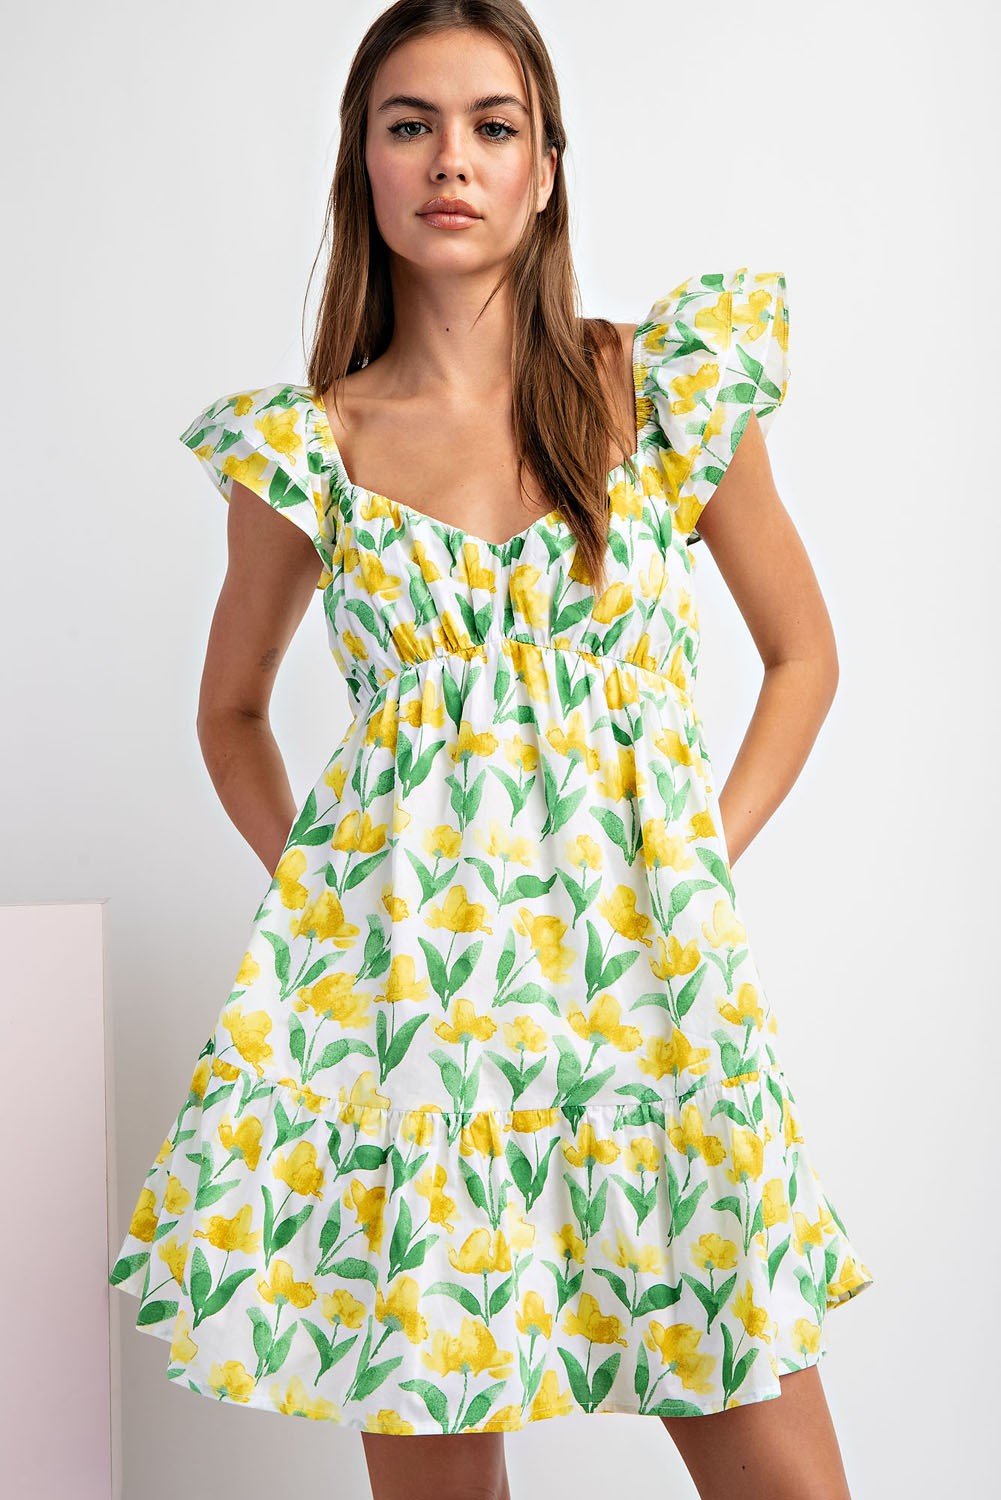 "All I Am" Dress (Banana) - Happily Ever Aften